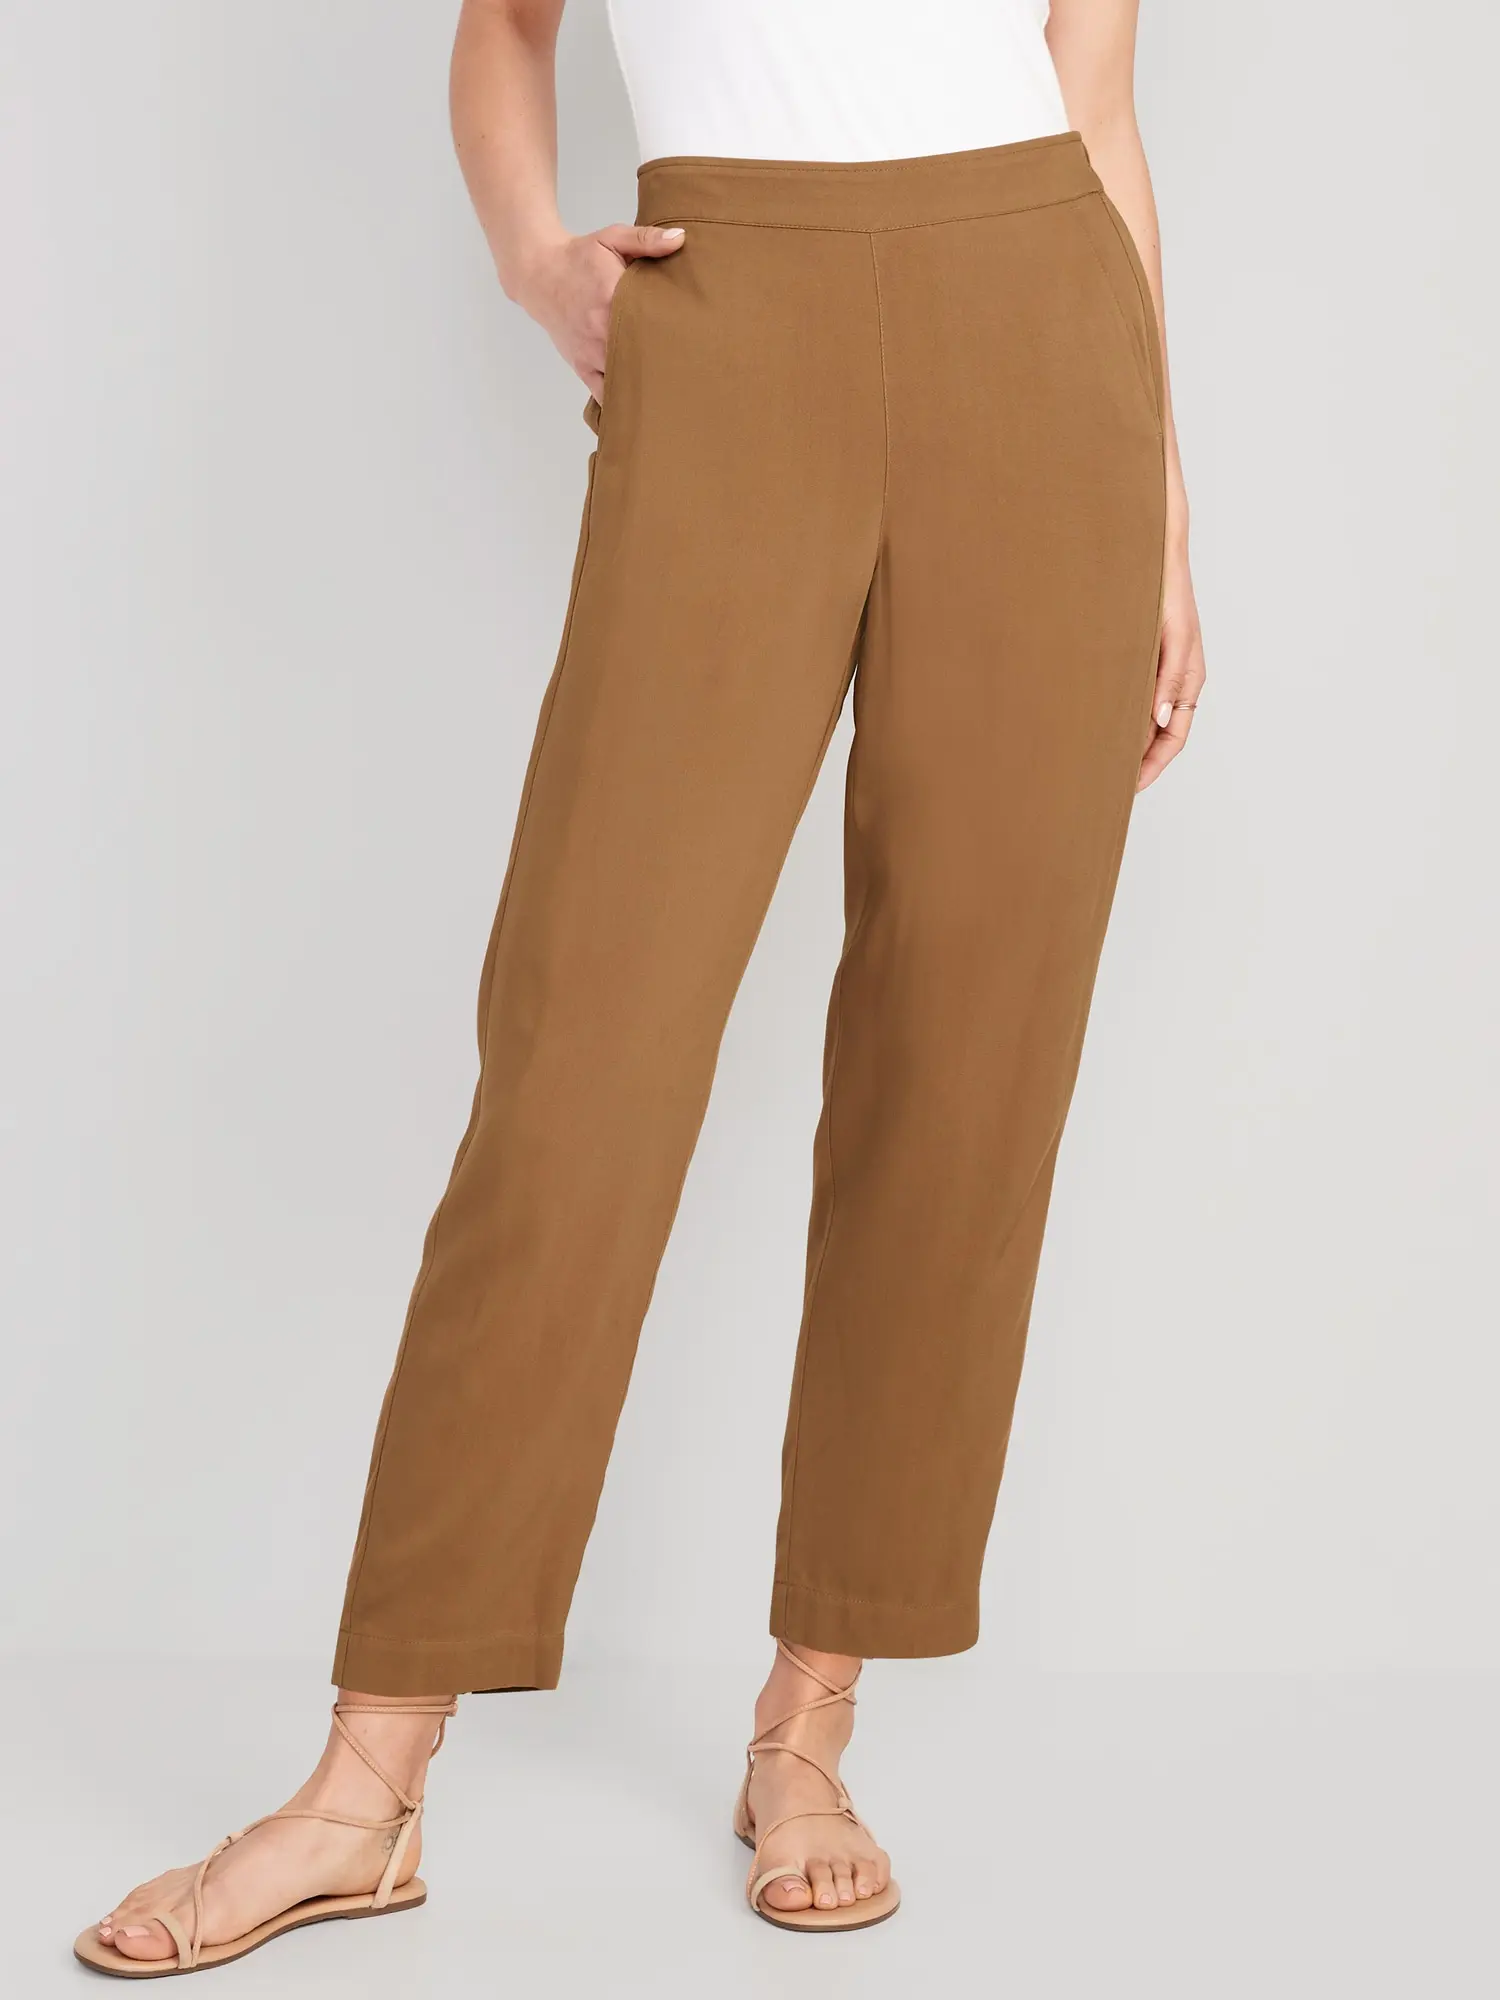 Old Navy High-Waisted Playa Taper Pants for Women brown. 1